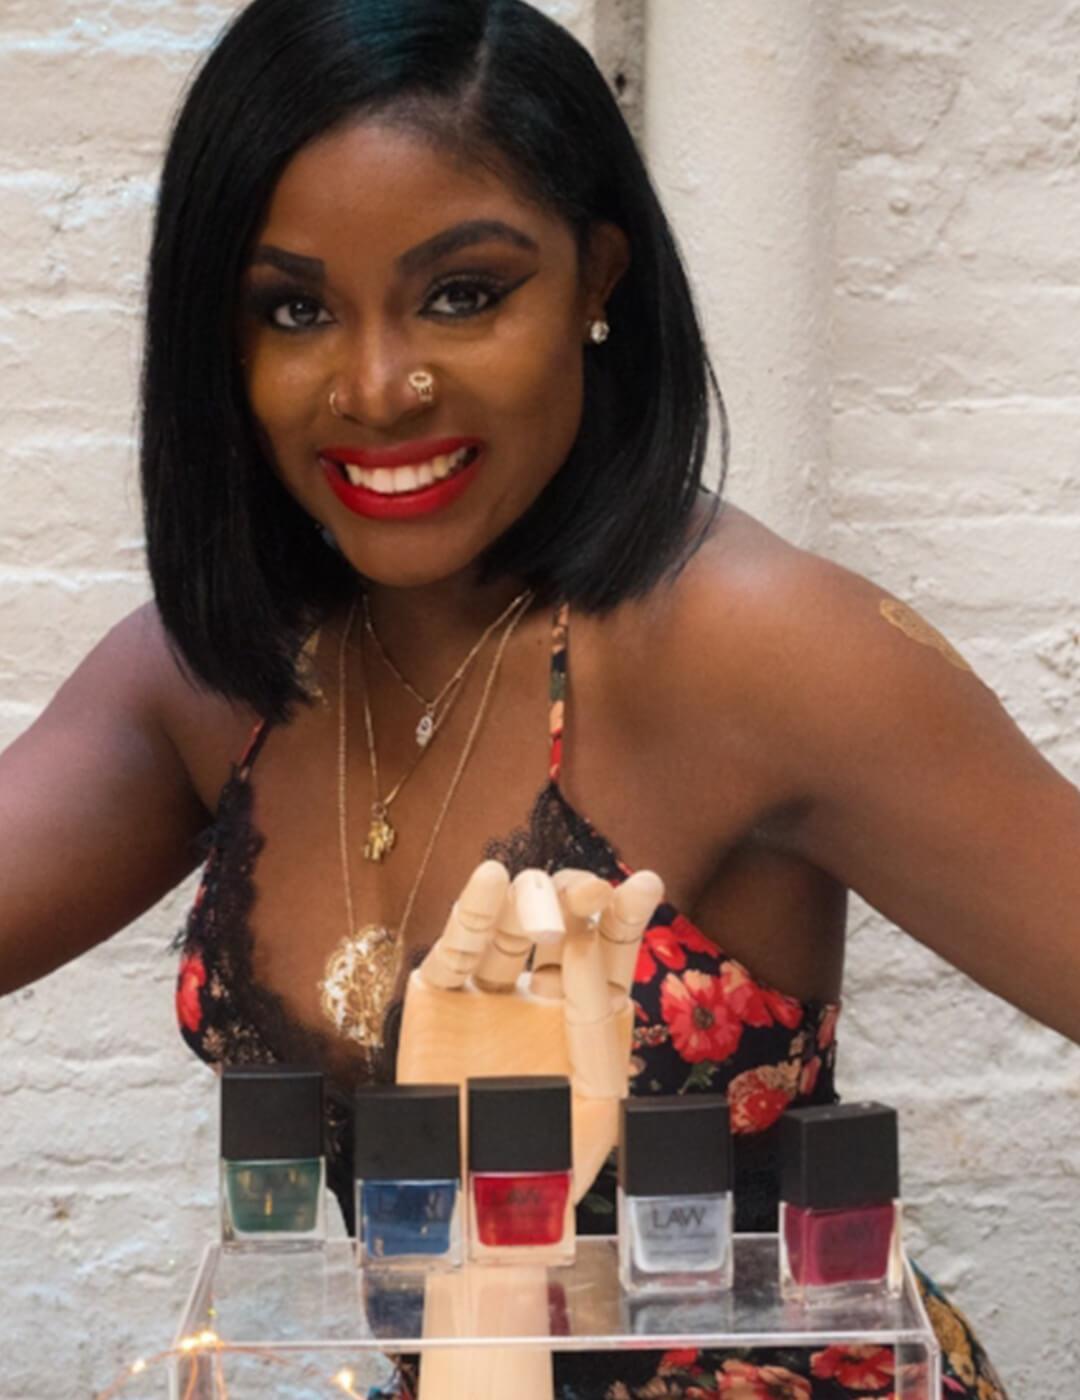 LAW BEAUTY ESSENTIALS founder Tanisha Lawrence posing with nail polishes